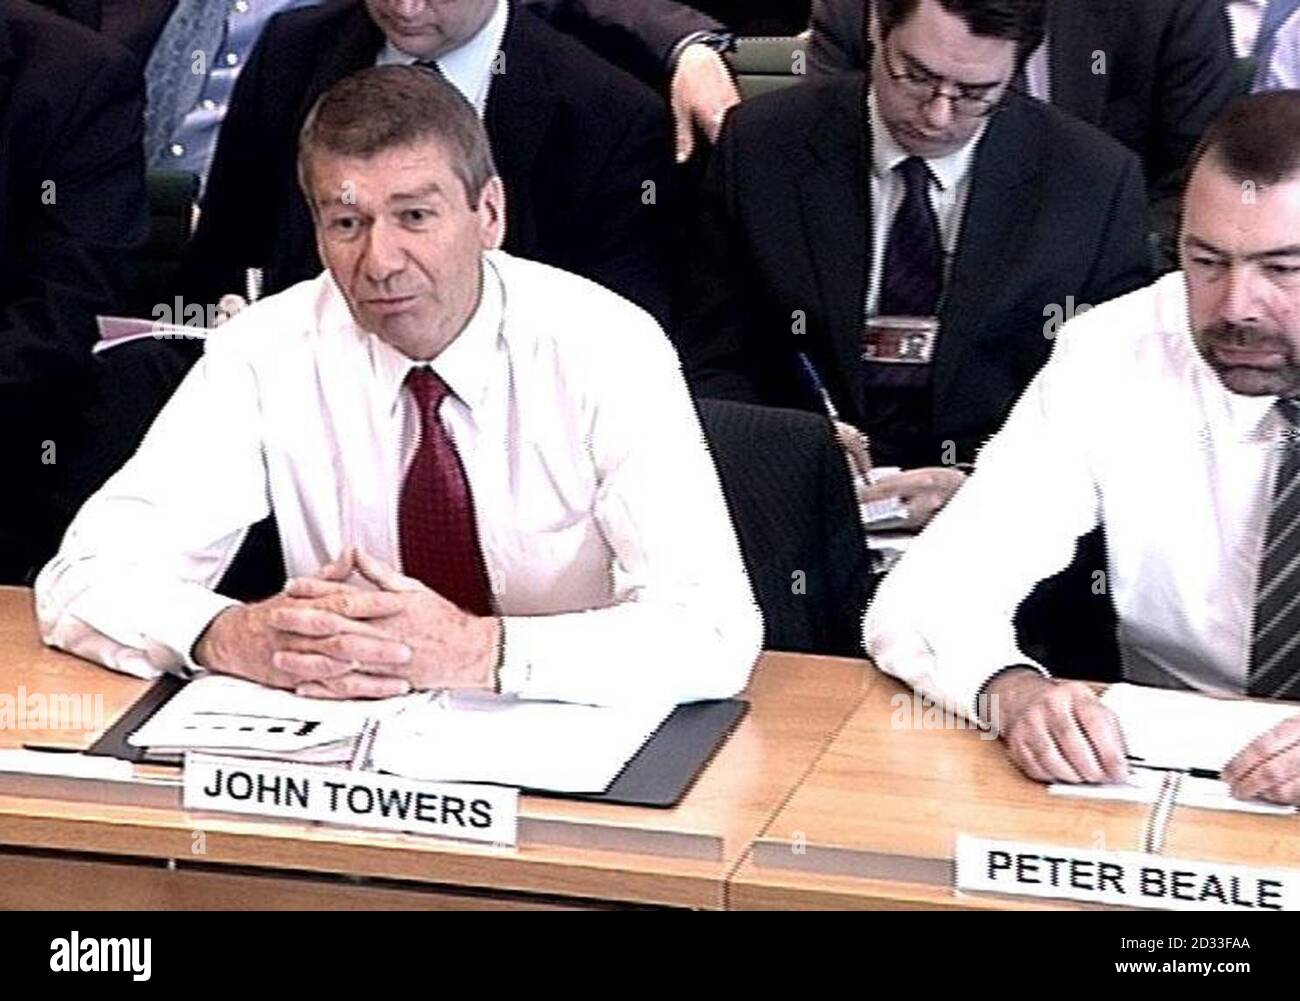 John Towers (left) and Peter Beale, Chairman and Vice-Chairman respectively of car manufacturers Rover, giving evidence, to the Trade and Industry Select Committee in the House of Commons which was inquiring into the UK Automotive Industry. Stock Photo